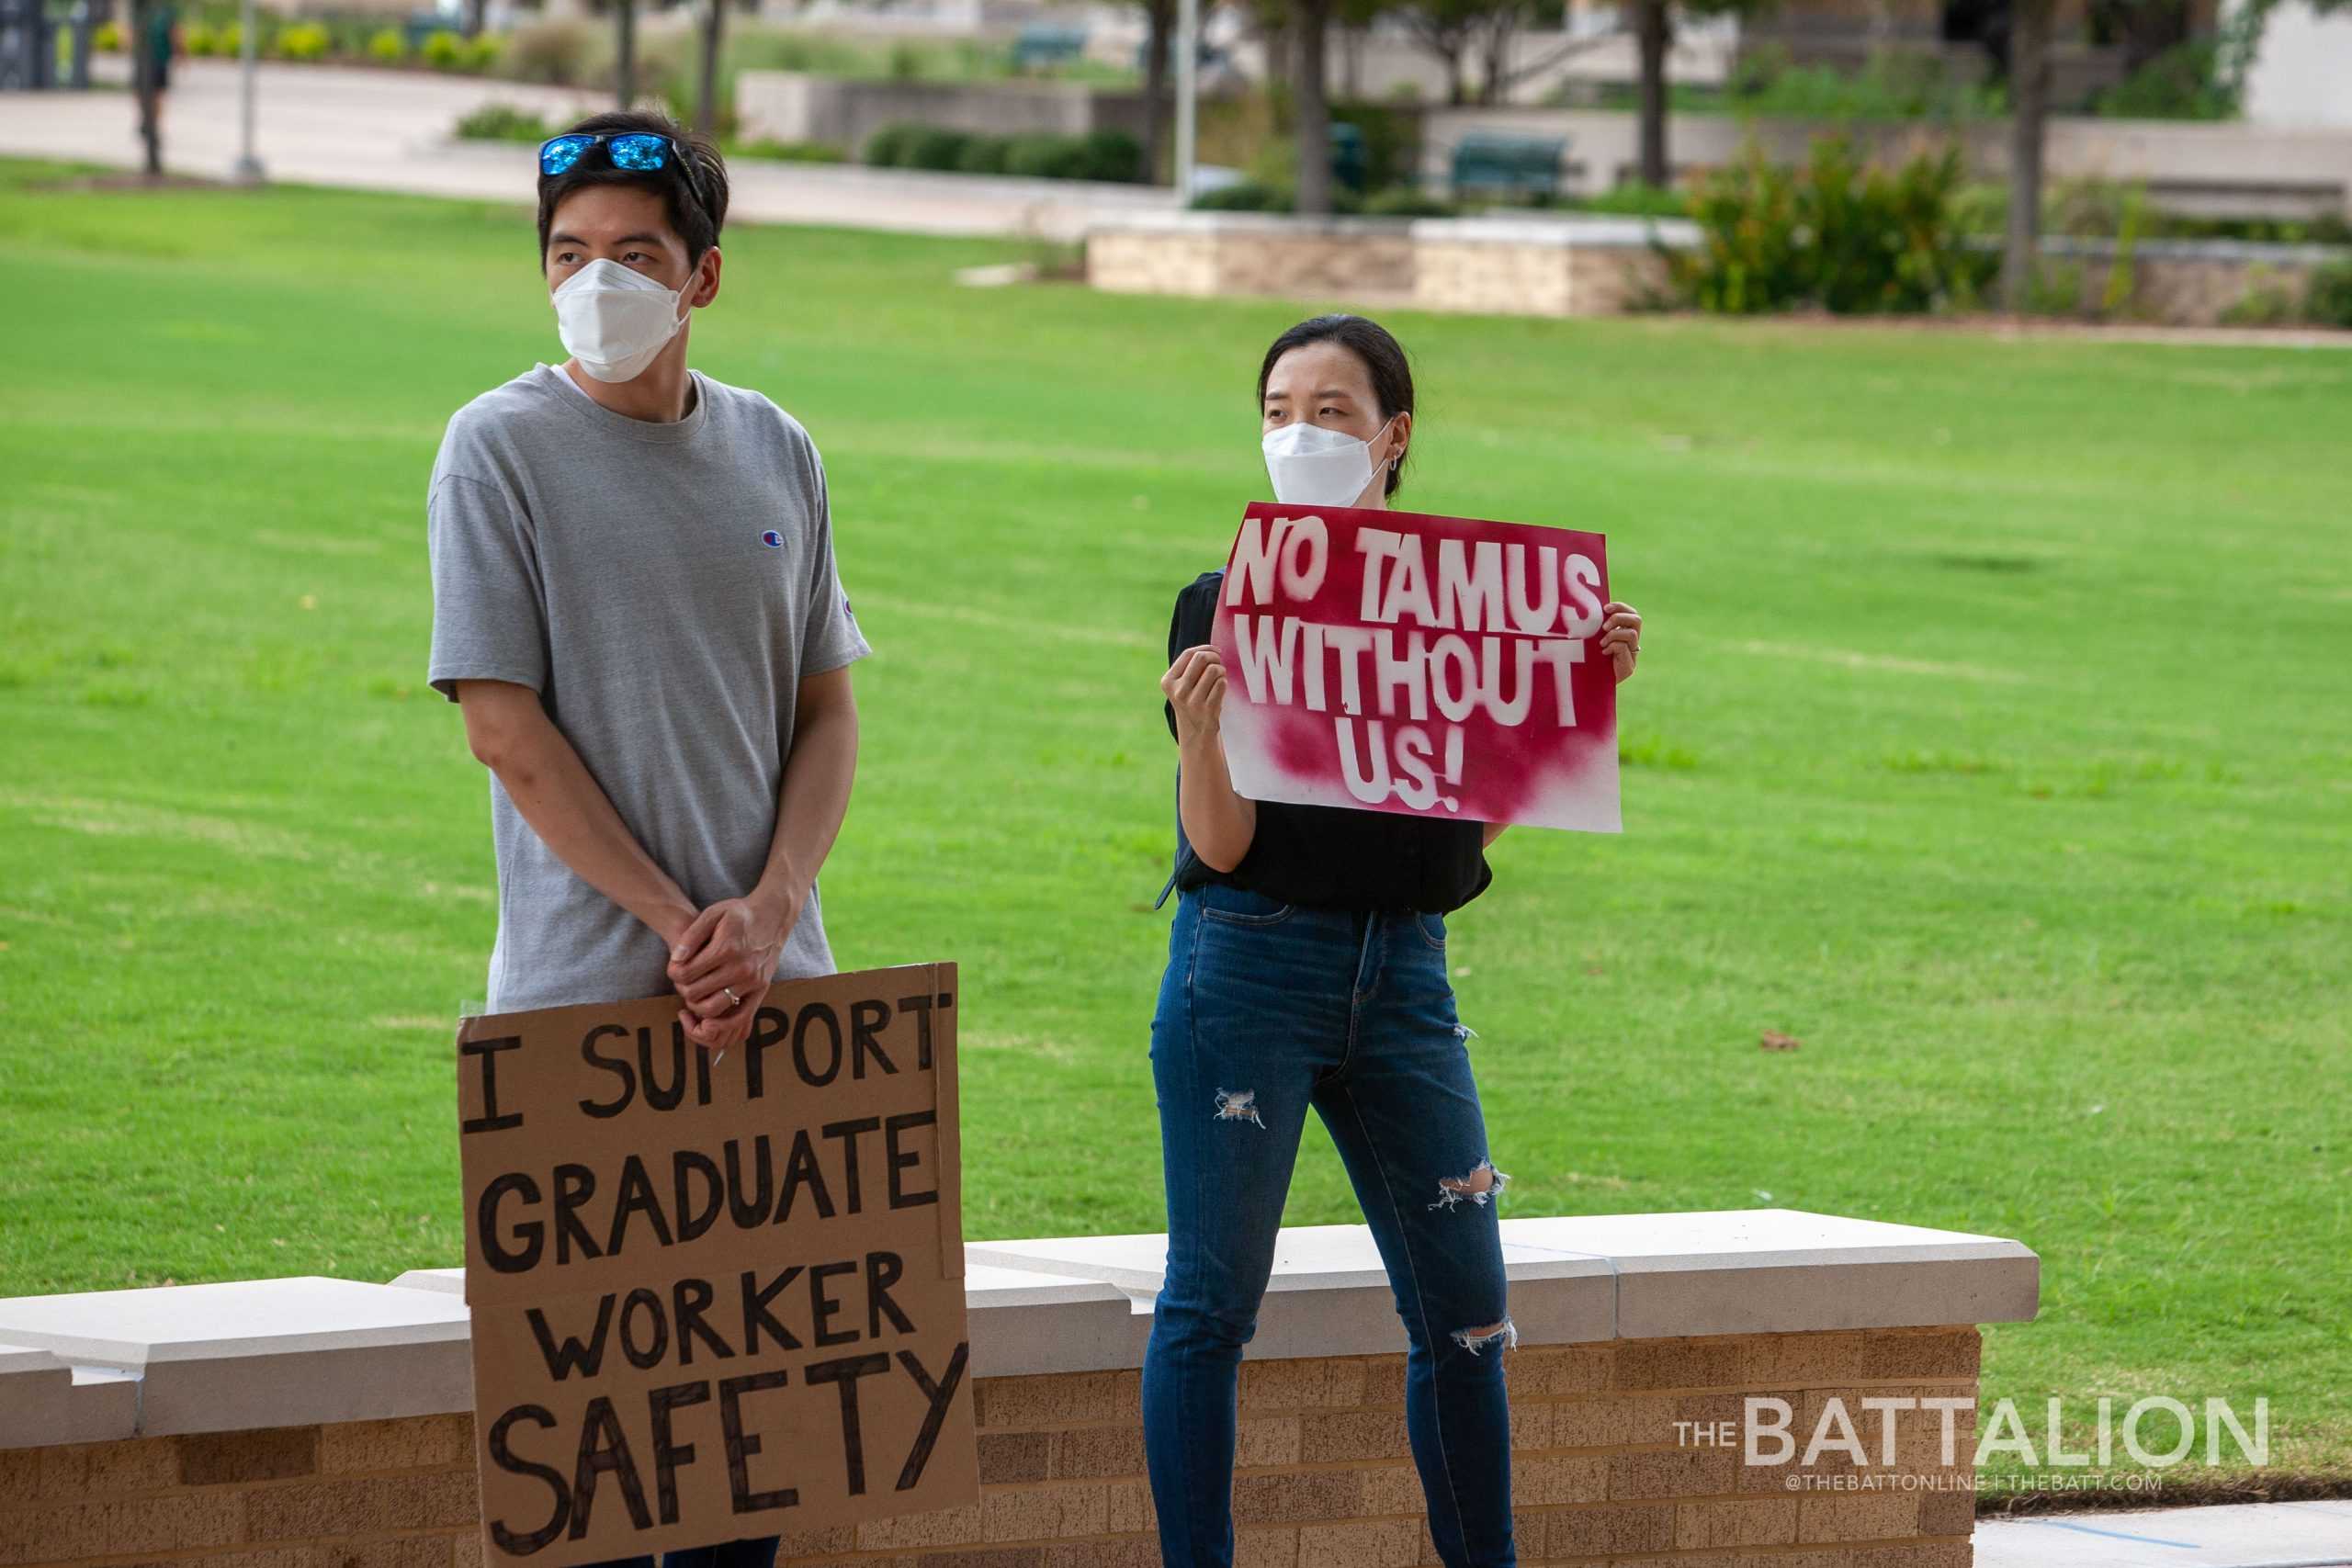 Graduate+student+workers+demand+university+action+amid+pandemic